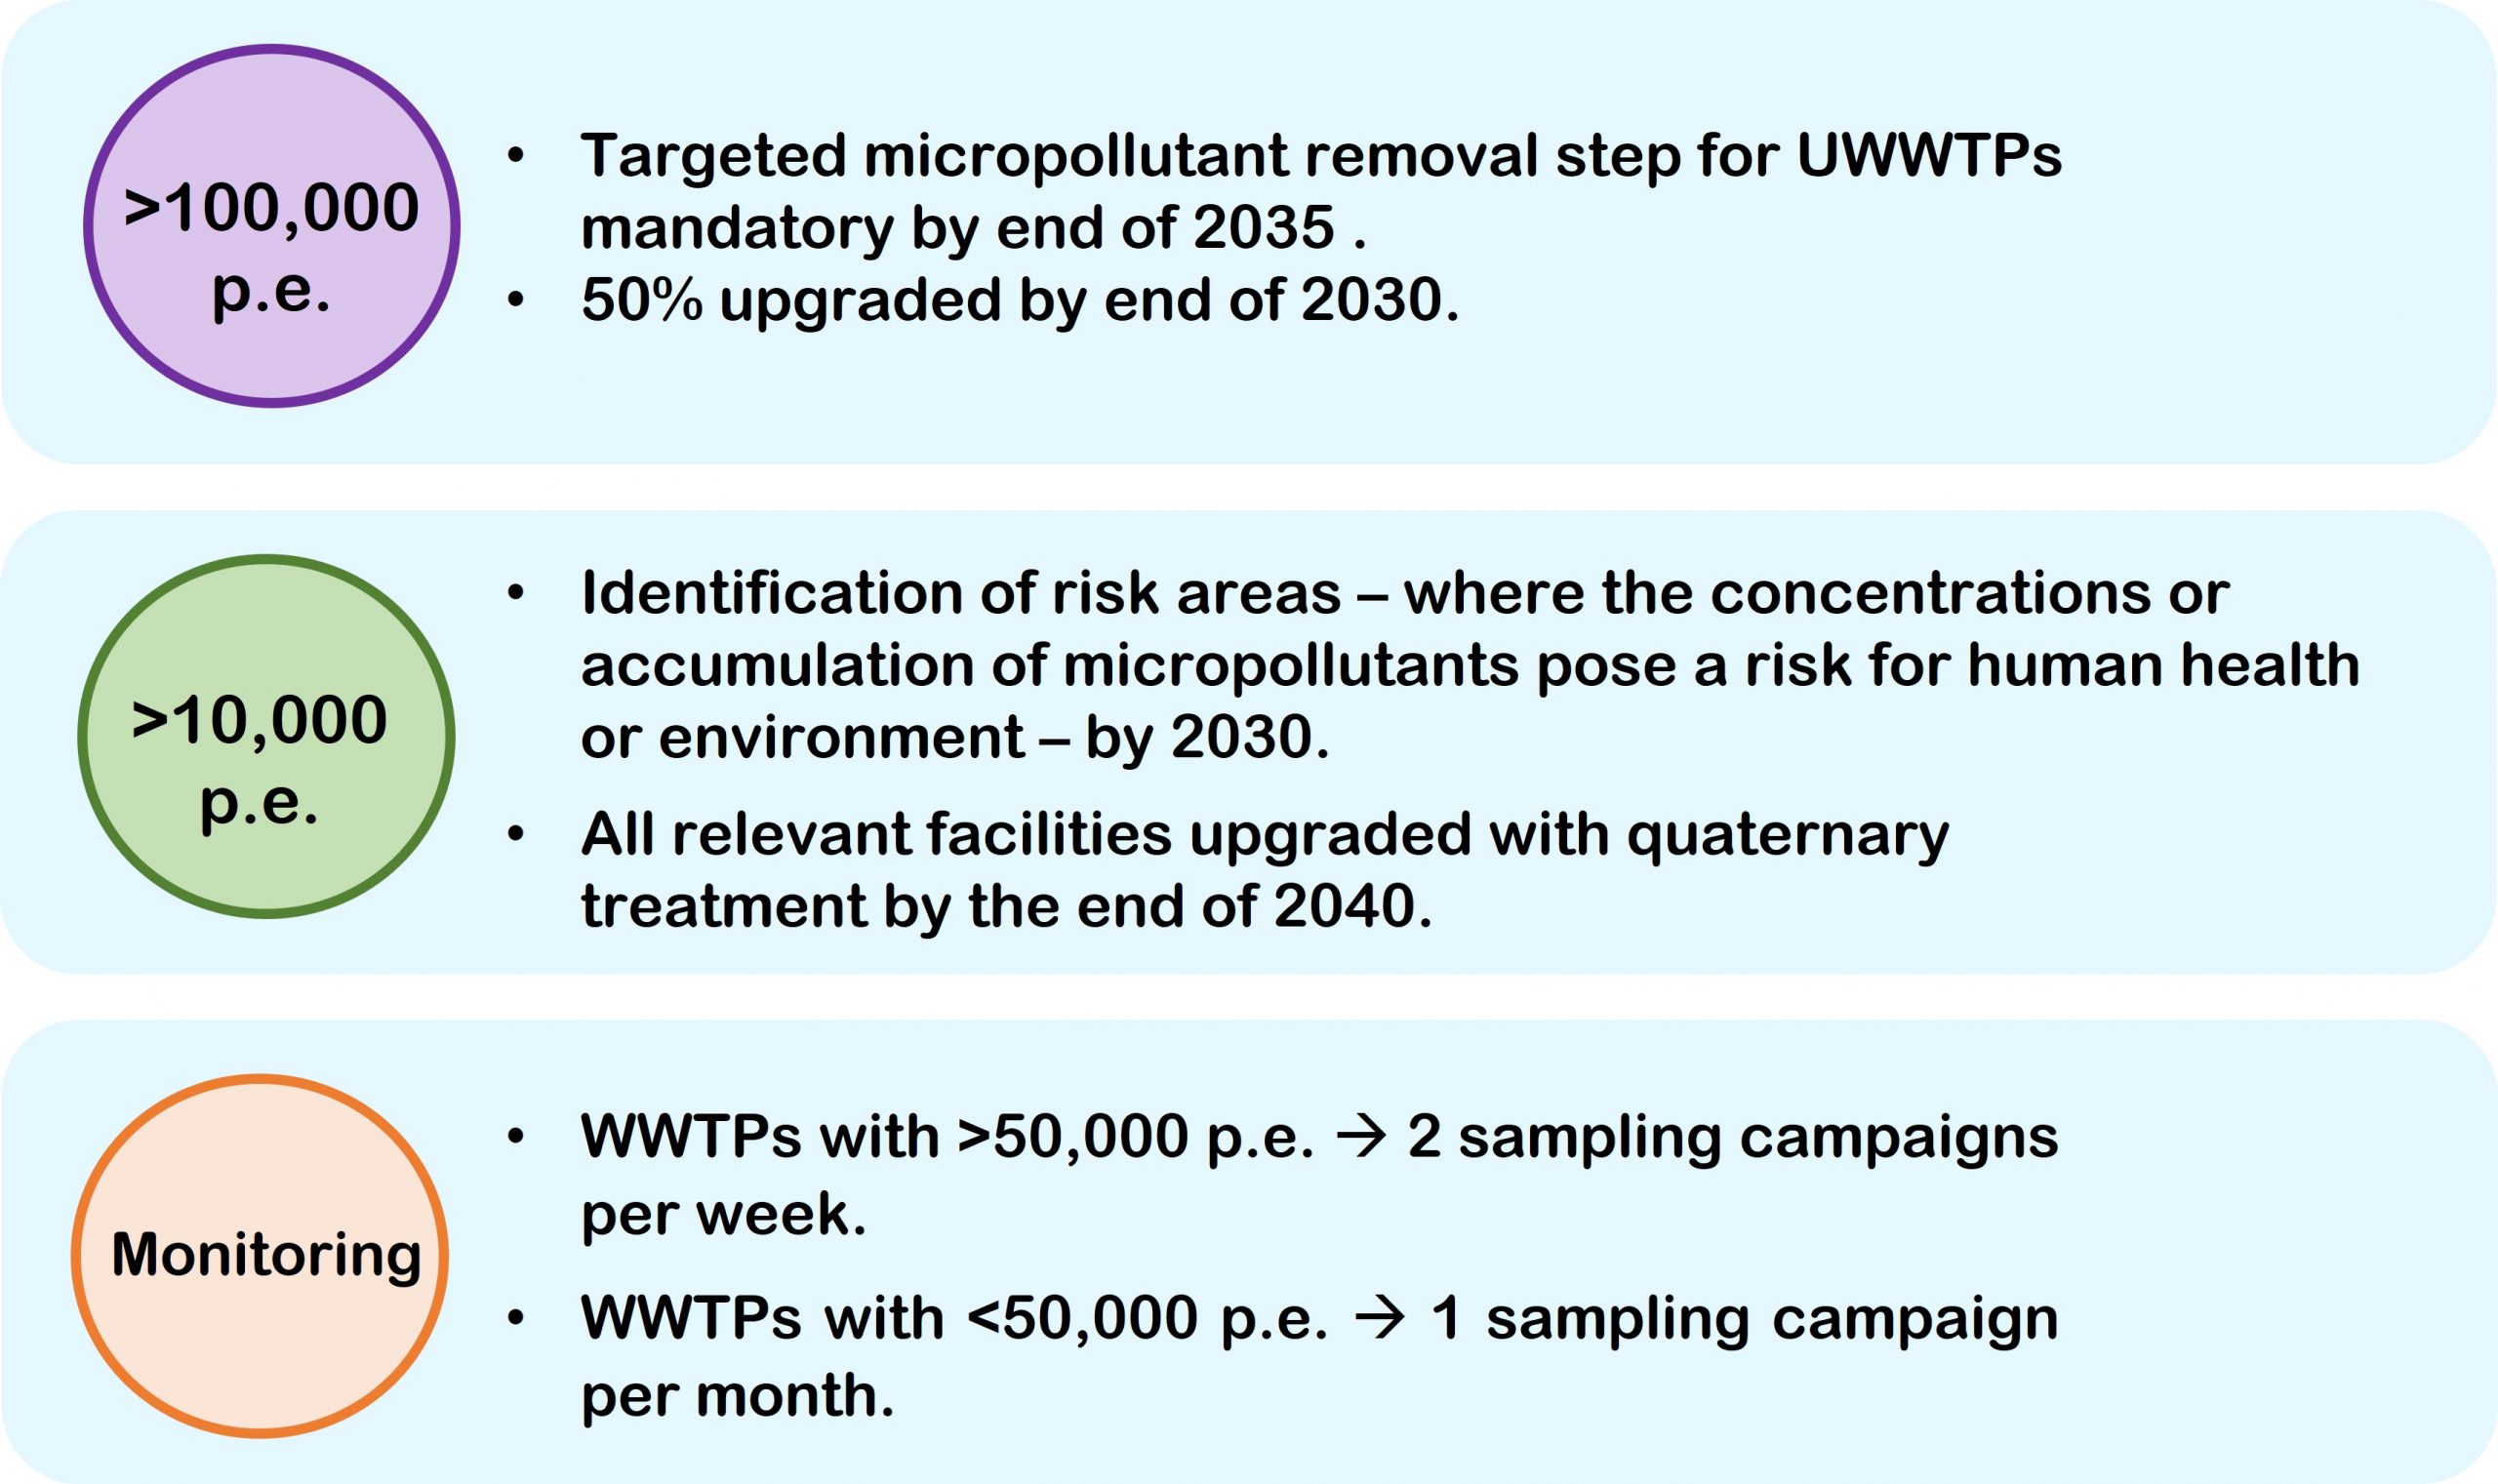 Planned actions for micropollutants (adapted from the revised Directive and Annex to the proposal).